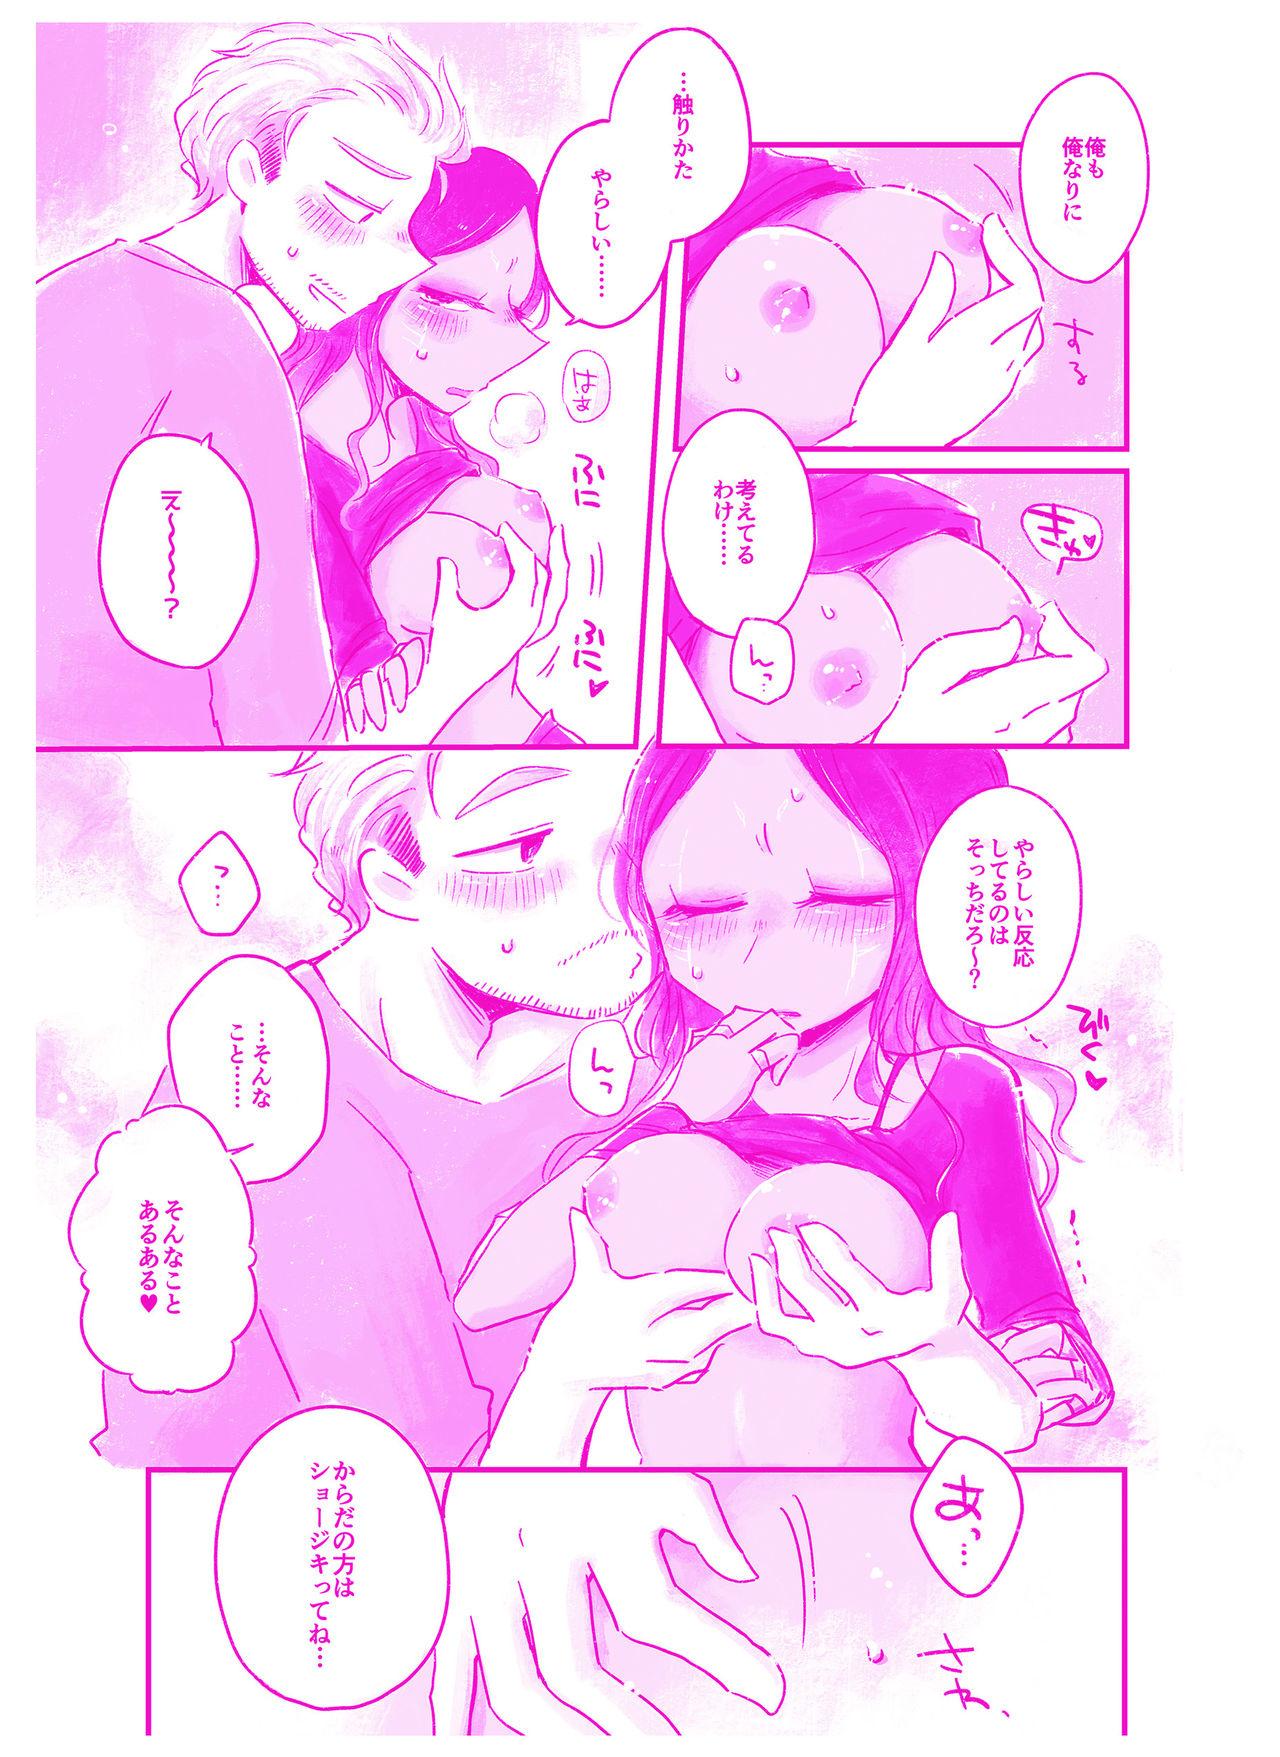 Perfect 言われてみてえもんだ - Guardians of the galaxy Hard Cock - Page 6